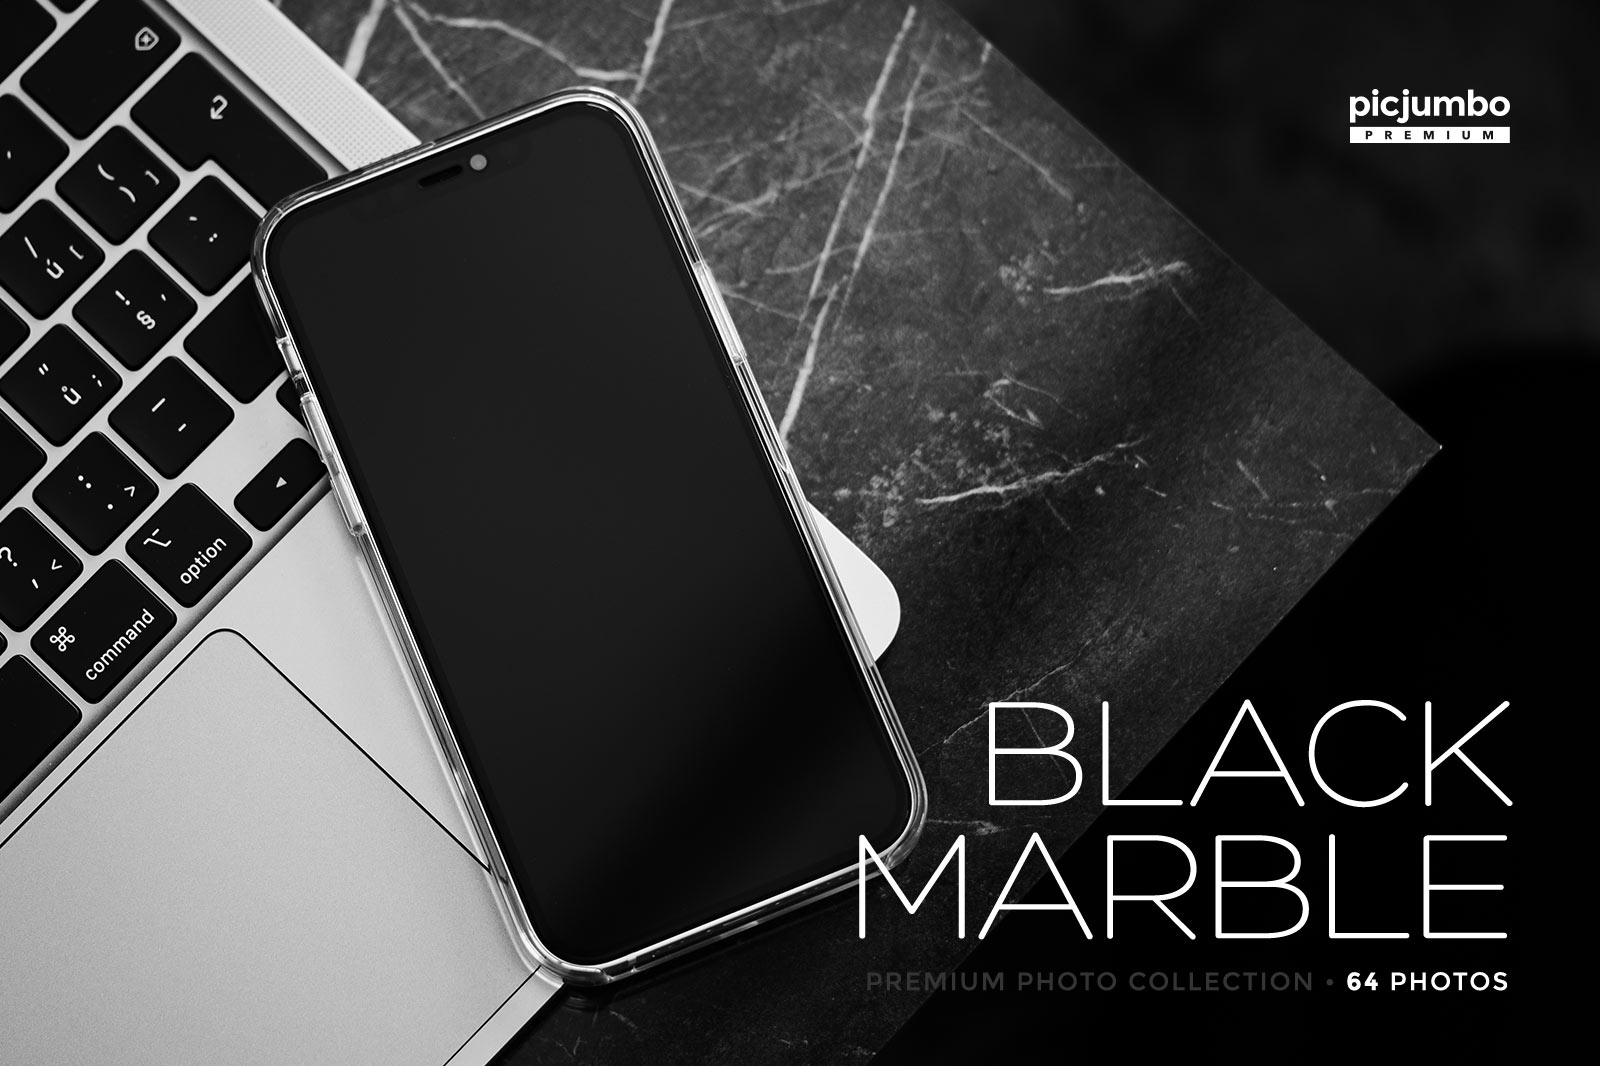 Download hi-res stock photos from our Black Marble PREMIUM Collection!